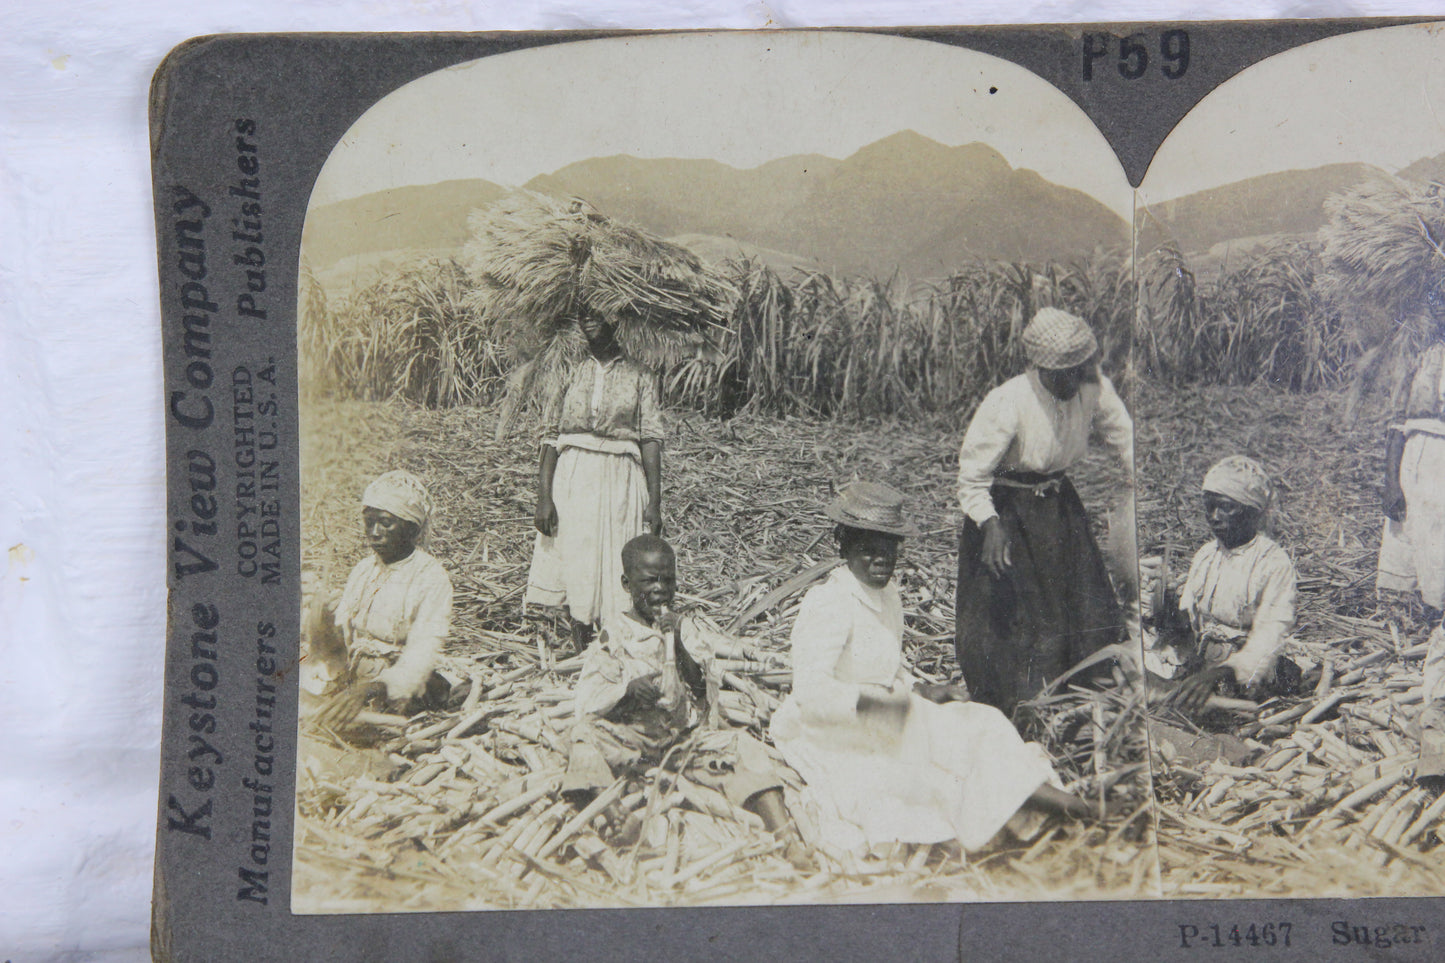 Preparing Sugar Cane Stock for Planting, West Indies - Keystone Stereo Card